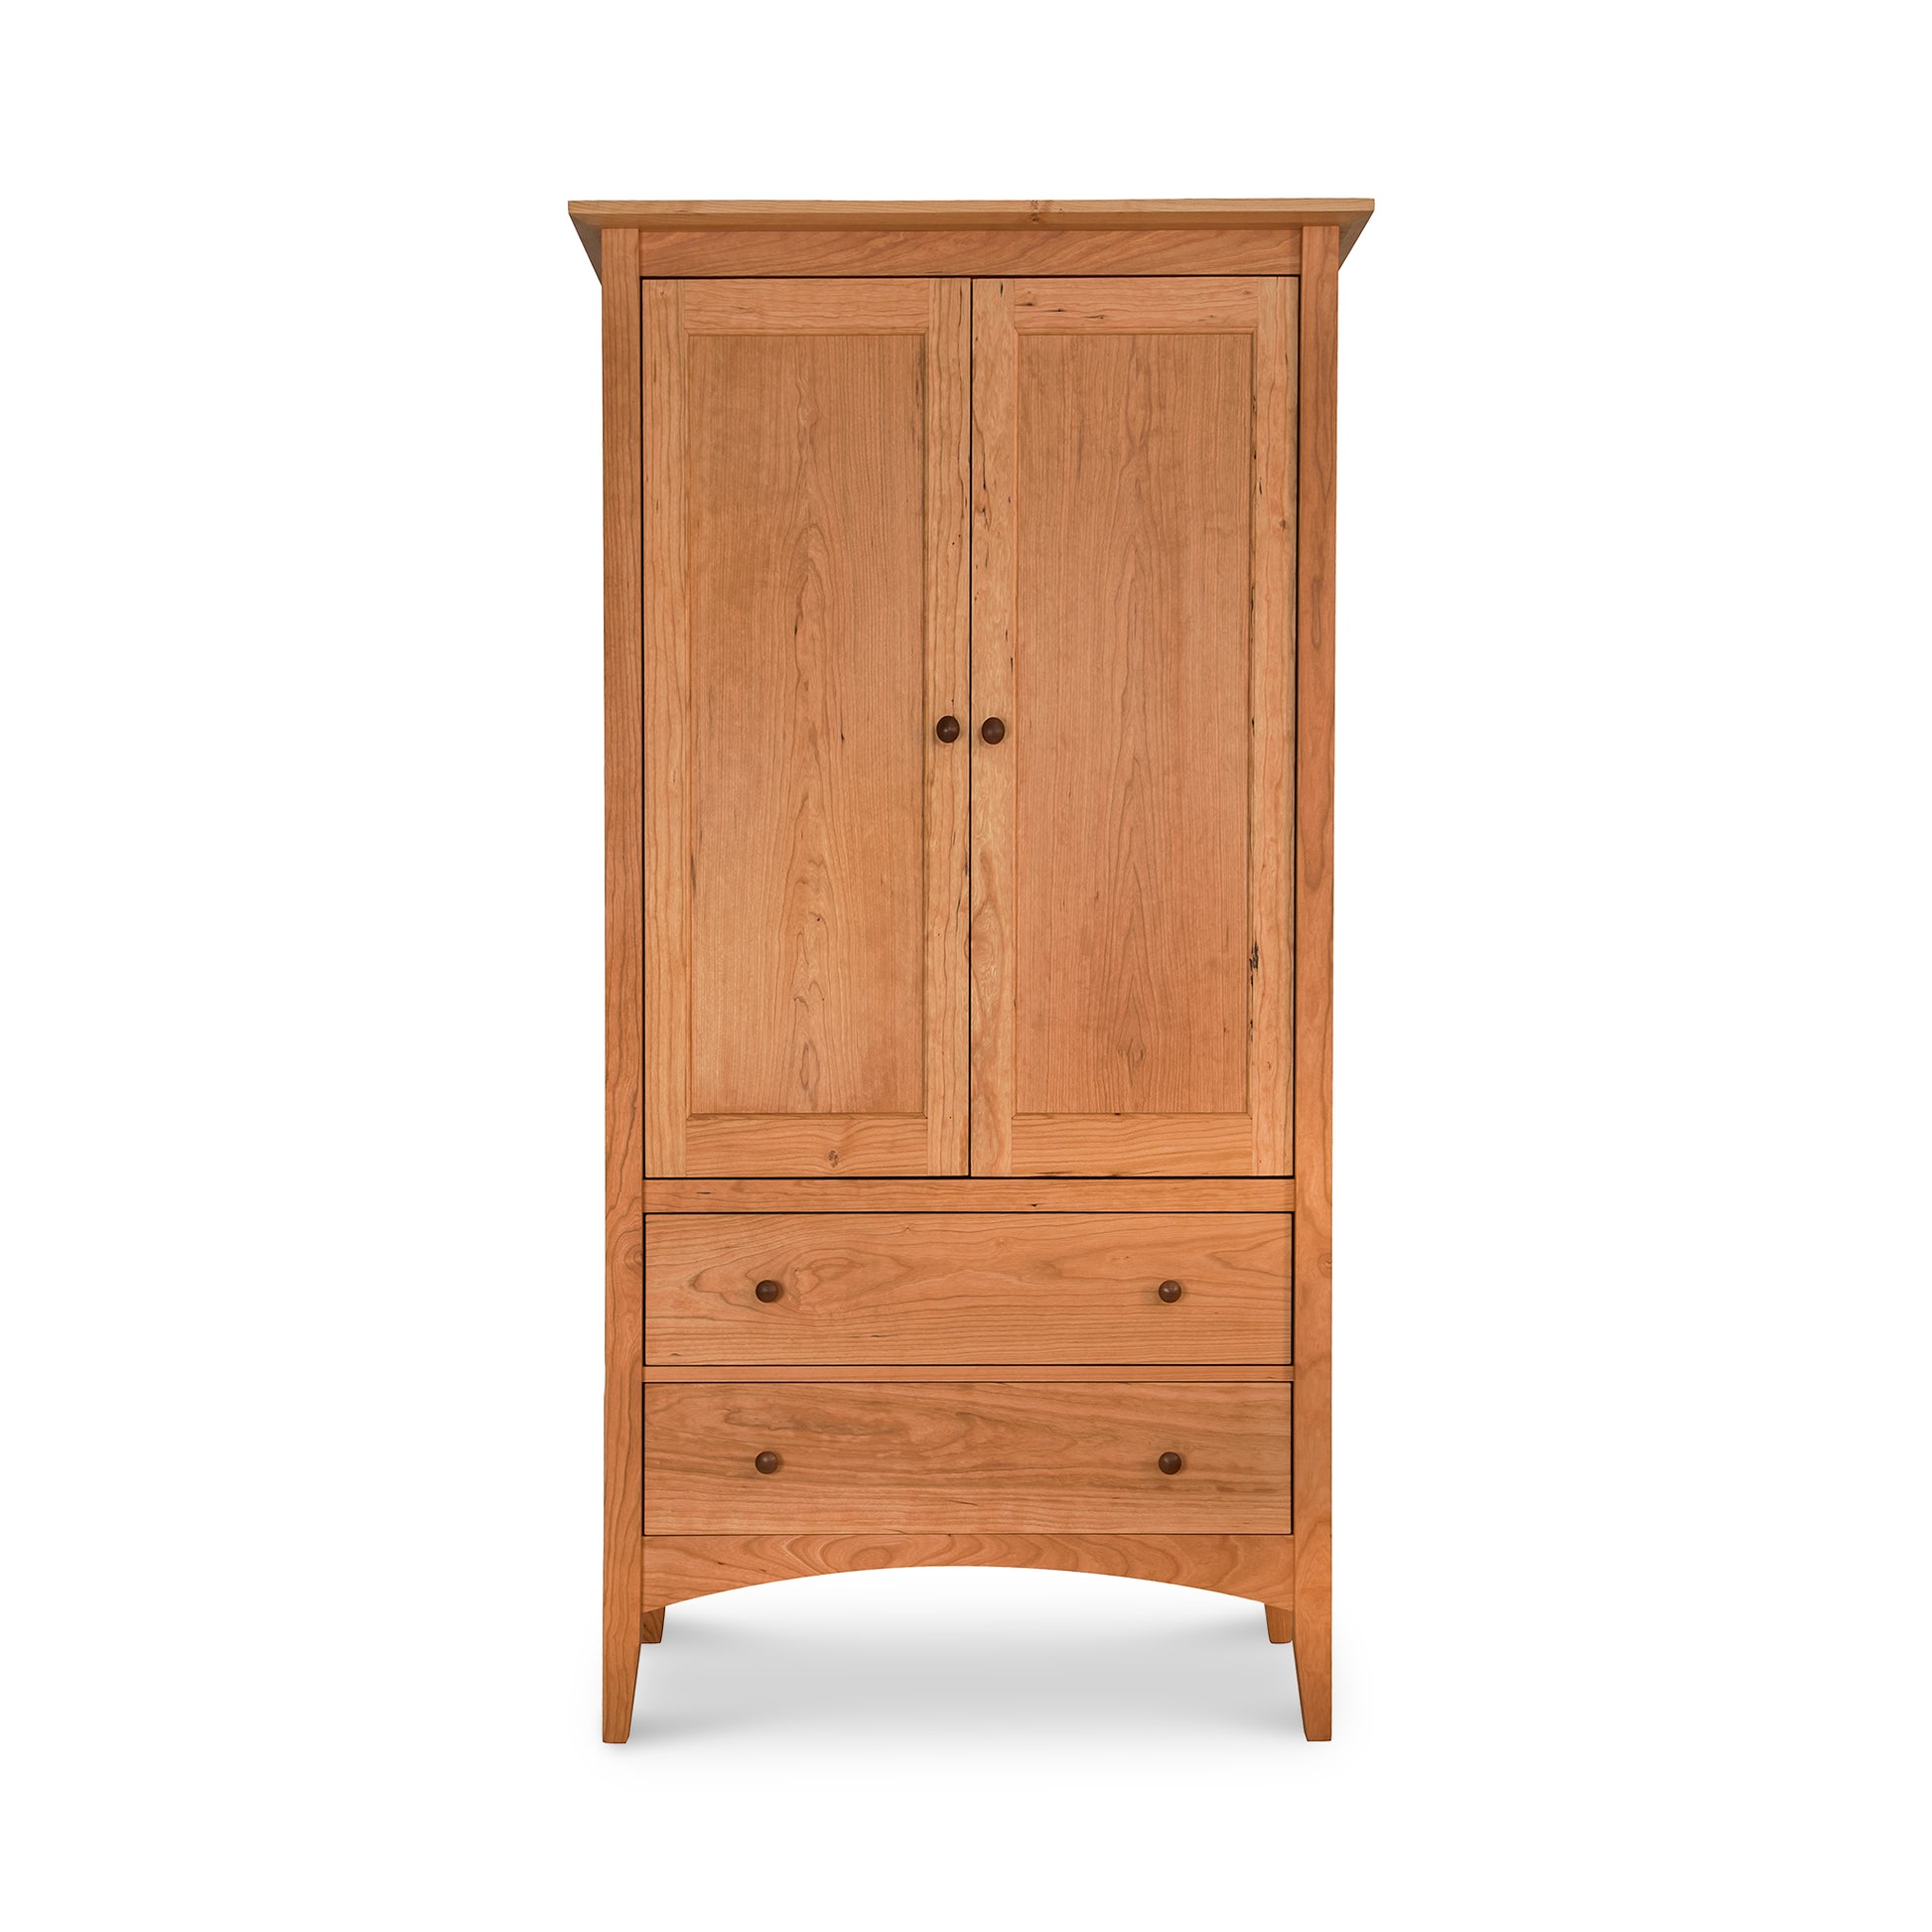 A Maple Corner Woodworks American Shaker Armoire with two upper doors and two lower drawers, set against a plain white background. The furniture features a simple, classic design with rounded knobs.